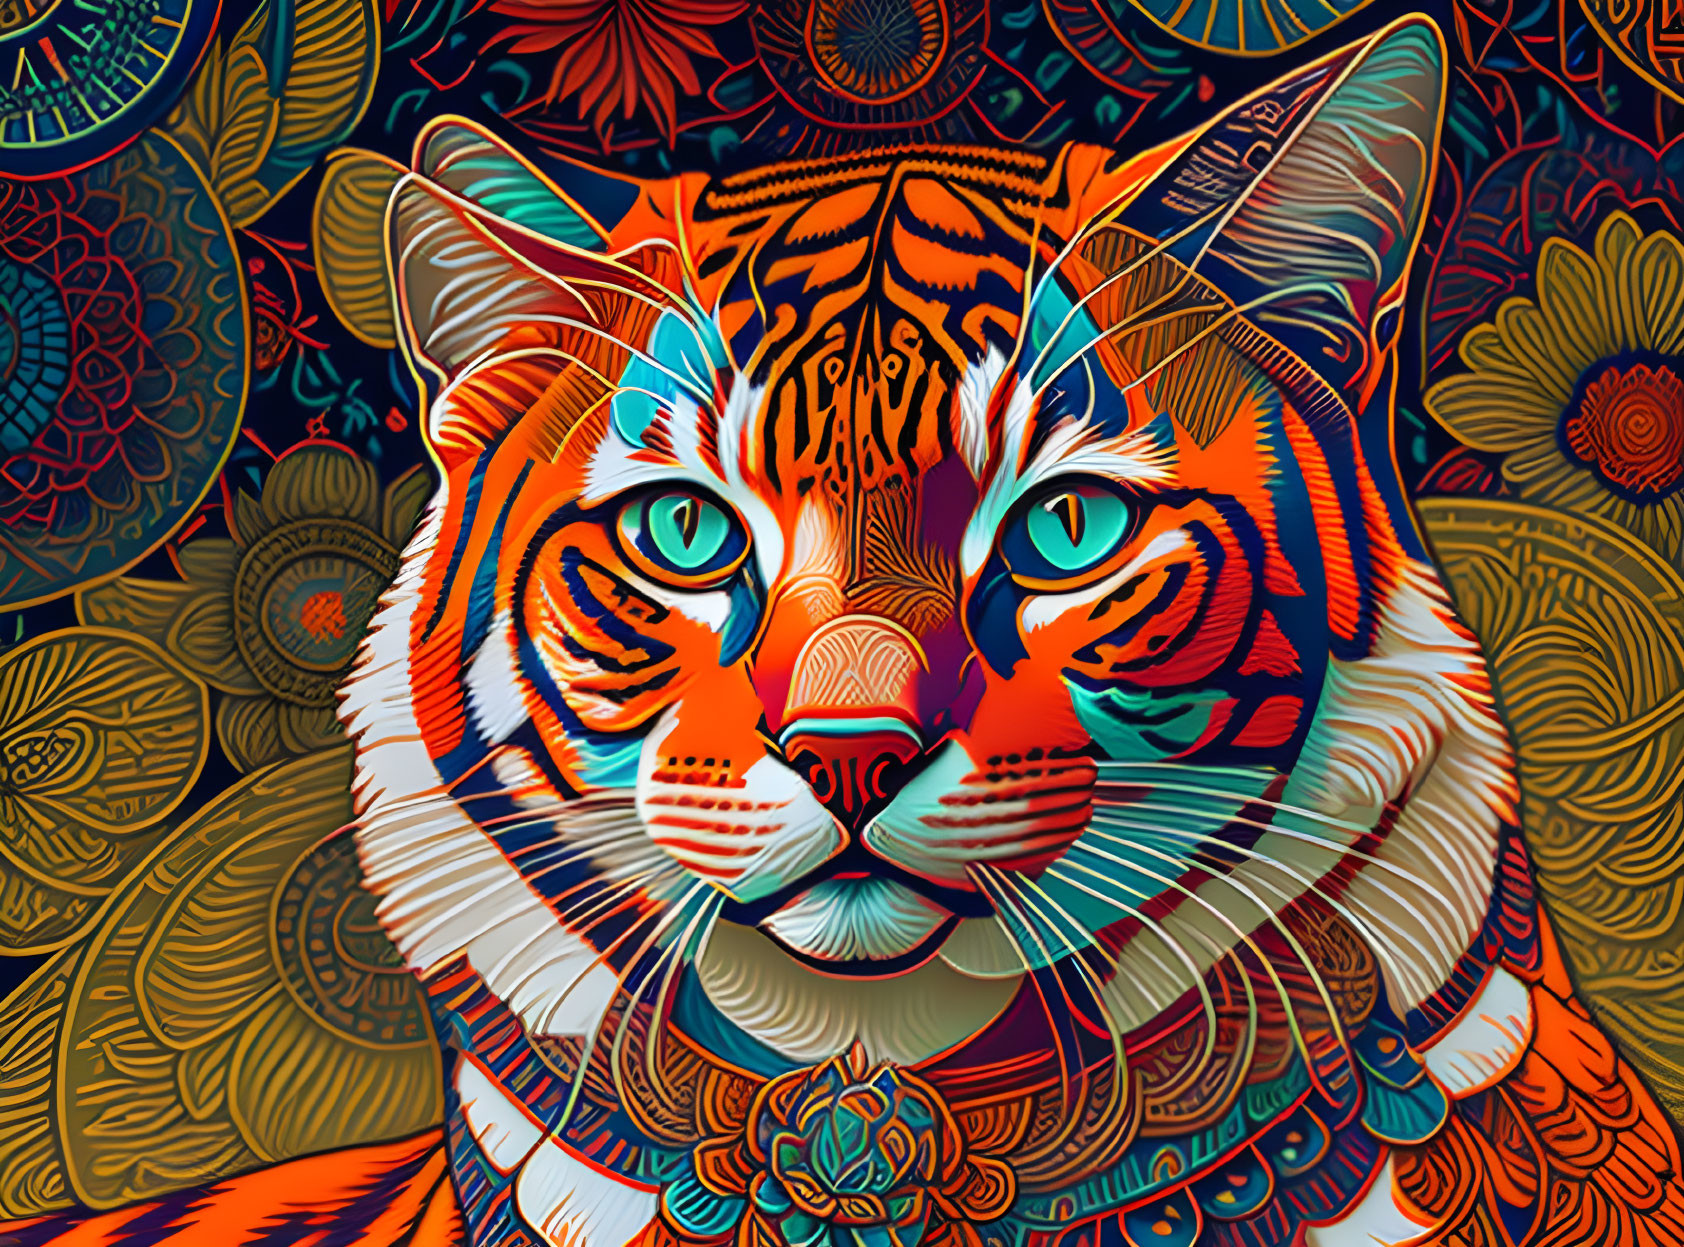 Colorful stylized cat illustration with intricate patterns and ornate background